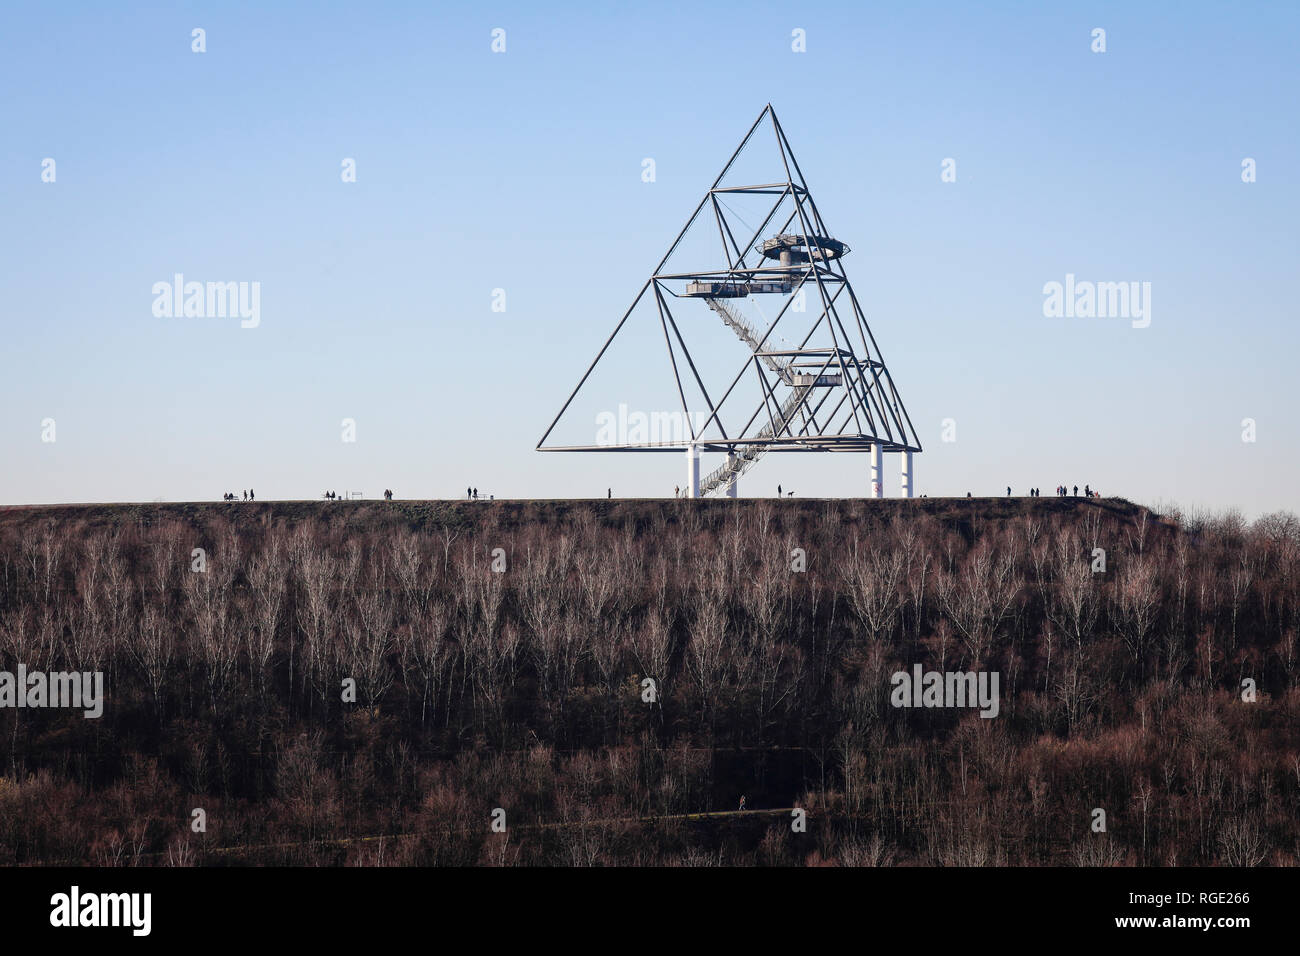 Bottrop, Ruhr area, North Rhine-Westphalia, Germany - Tetraeder, the slagheap event Emscherblick is a walkable viewing terrace in the form of a three- Stock Photo